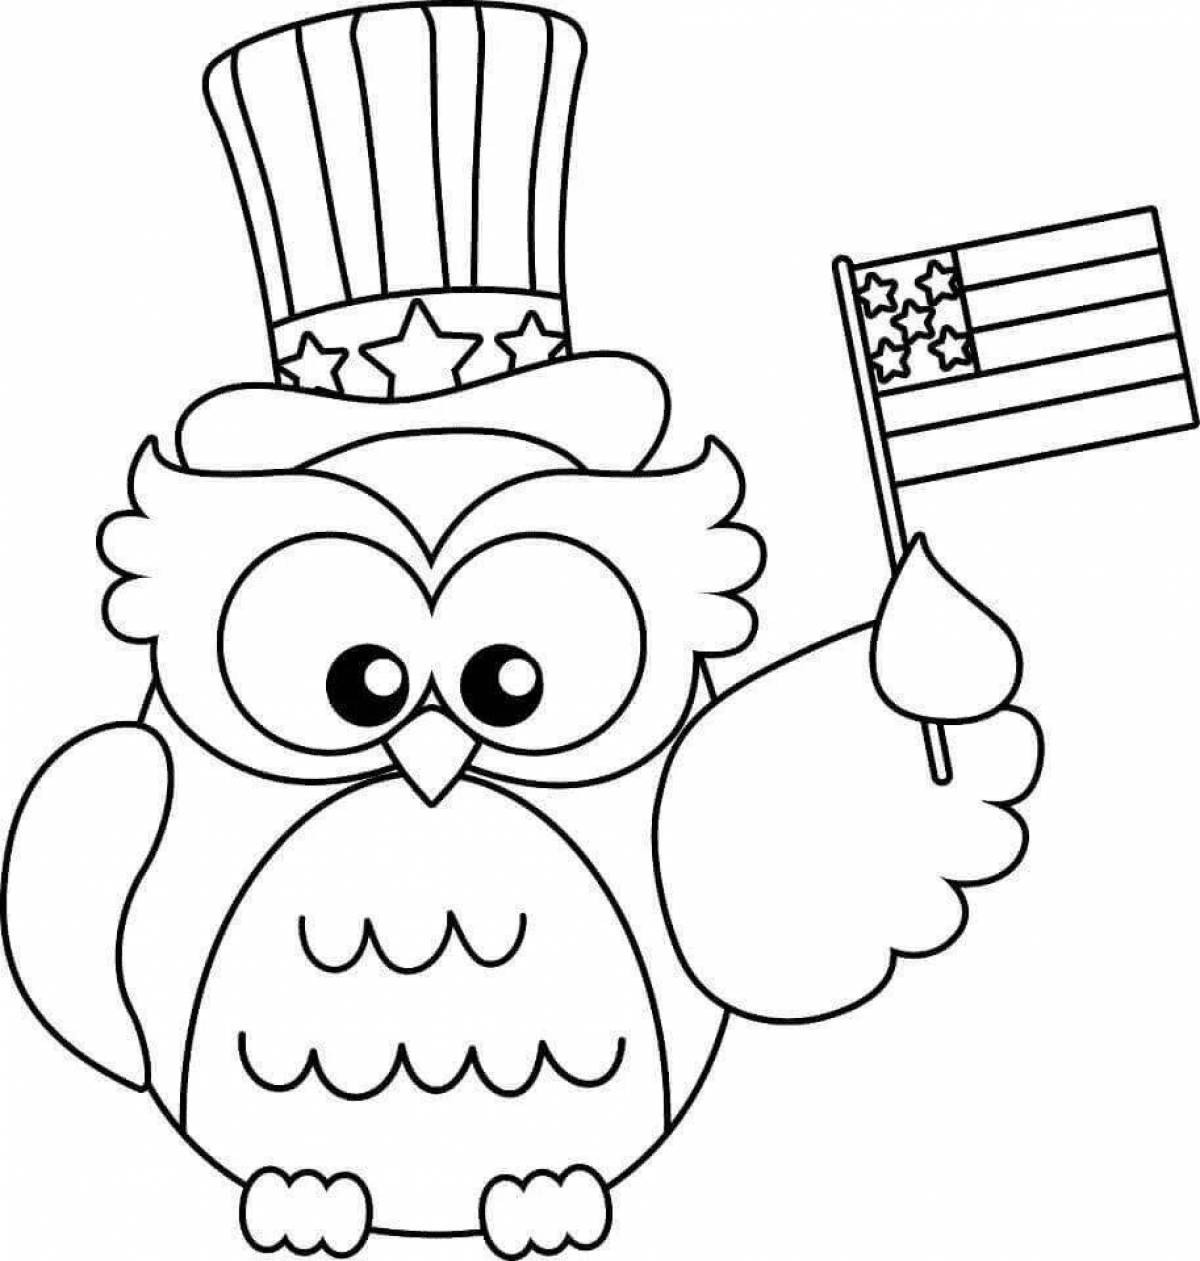 Wise Owl Coloring Page with Star Crown